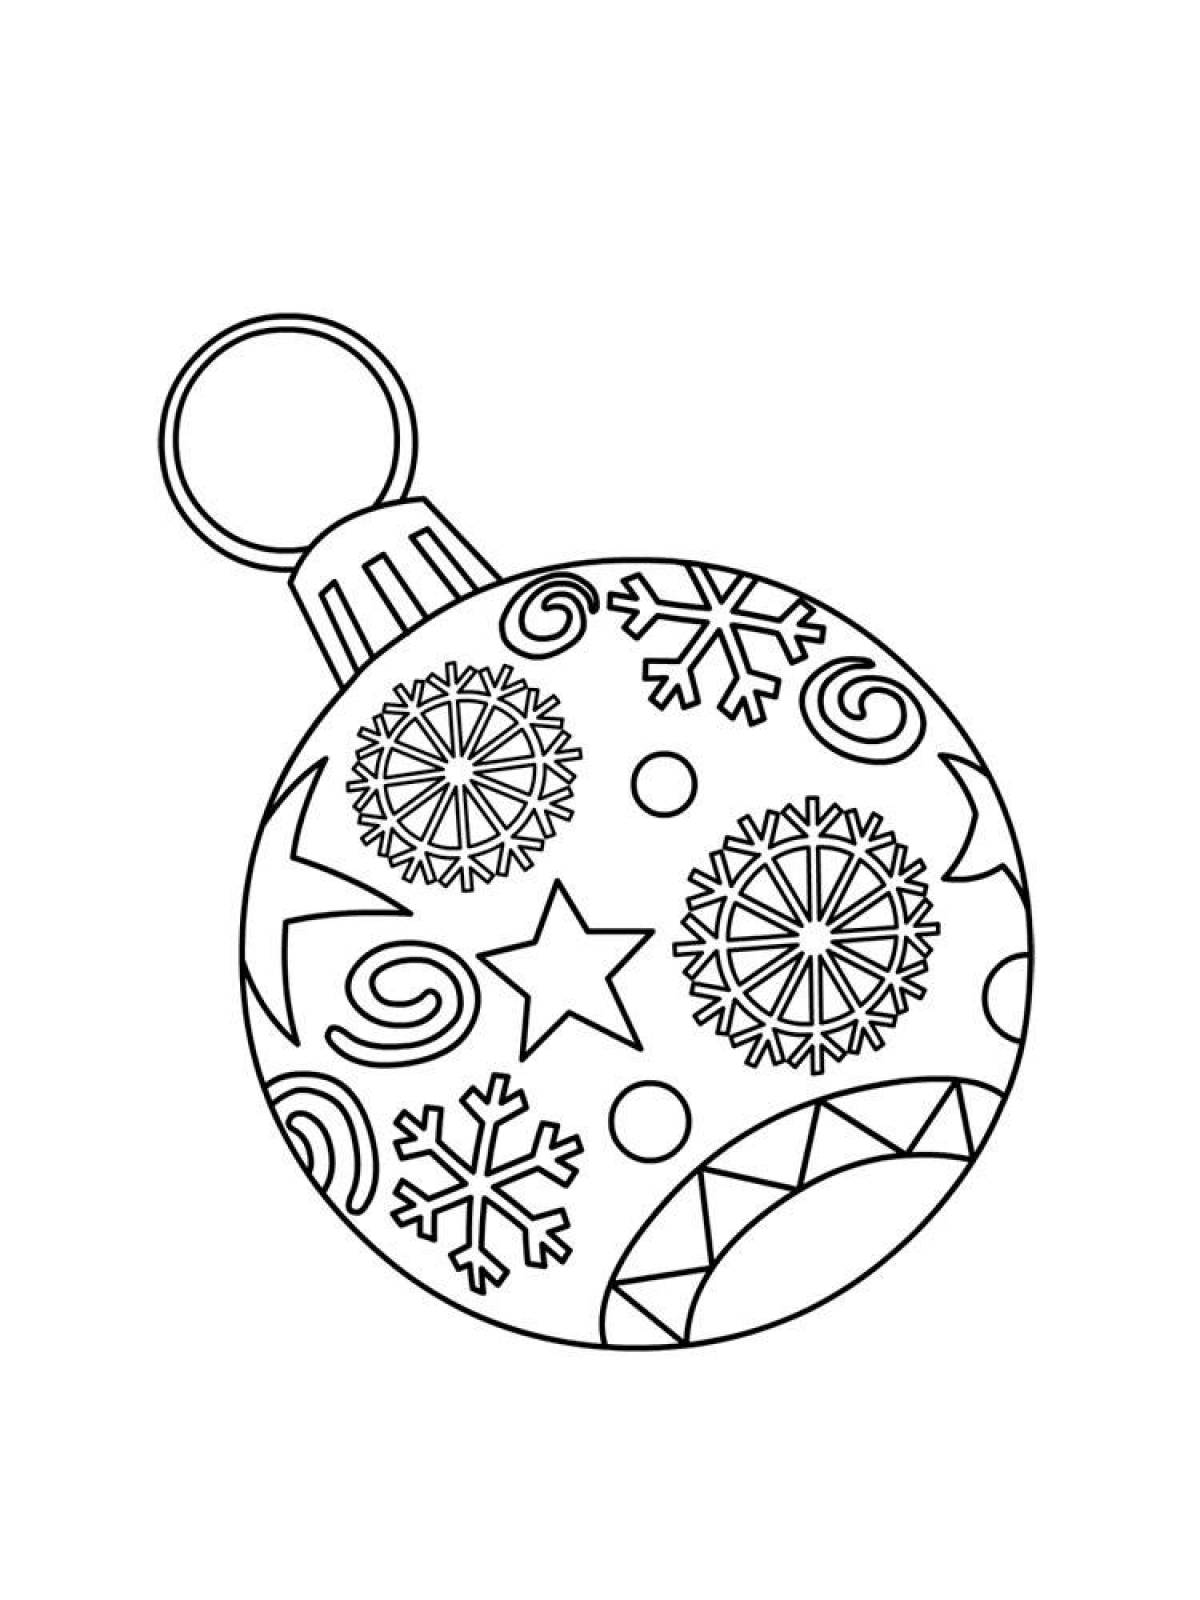 Coloring book exciting Christmas decorations